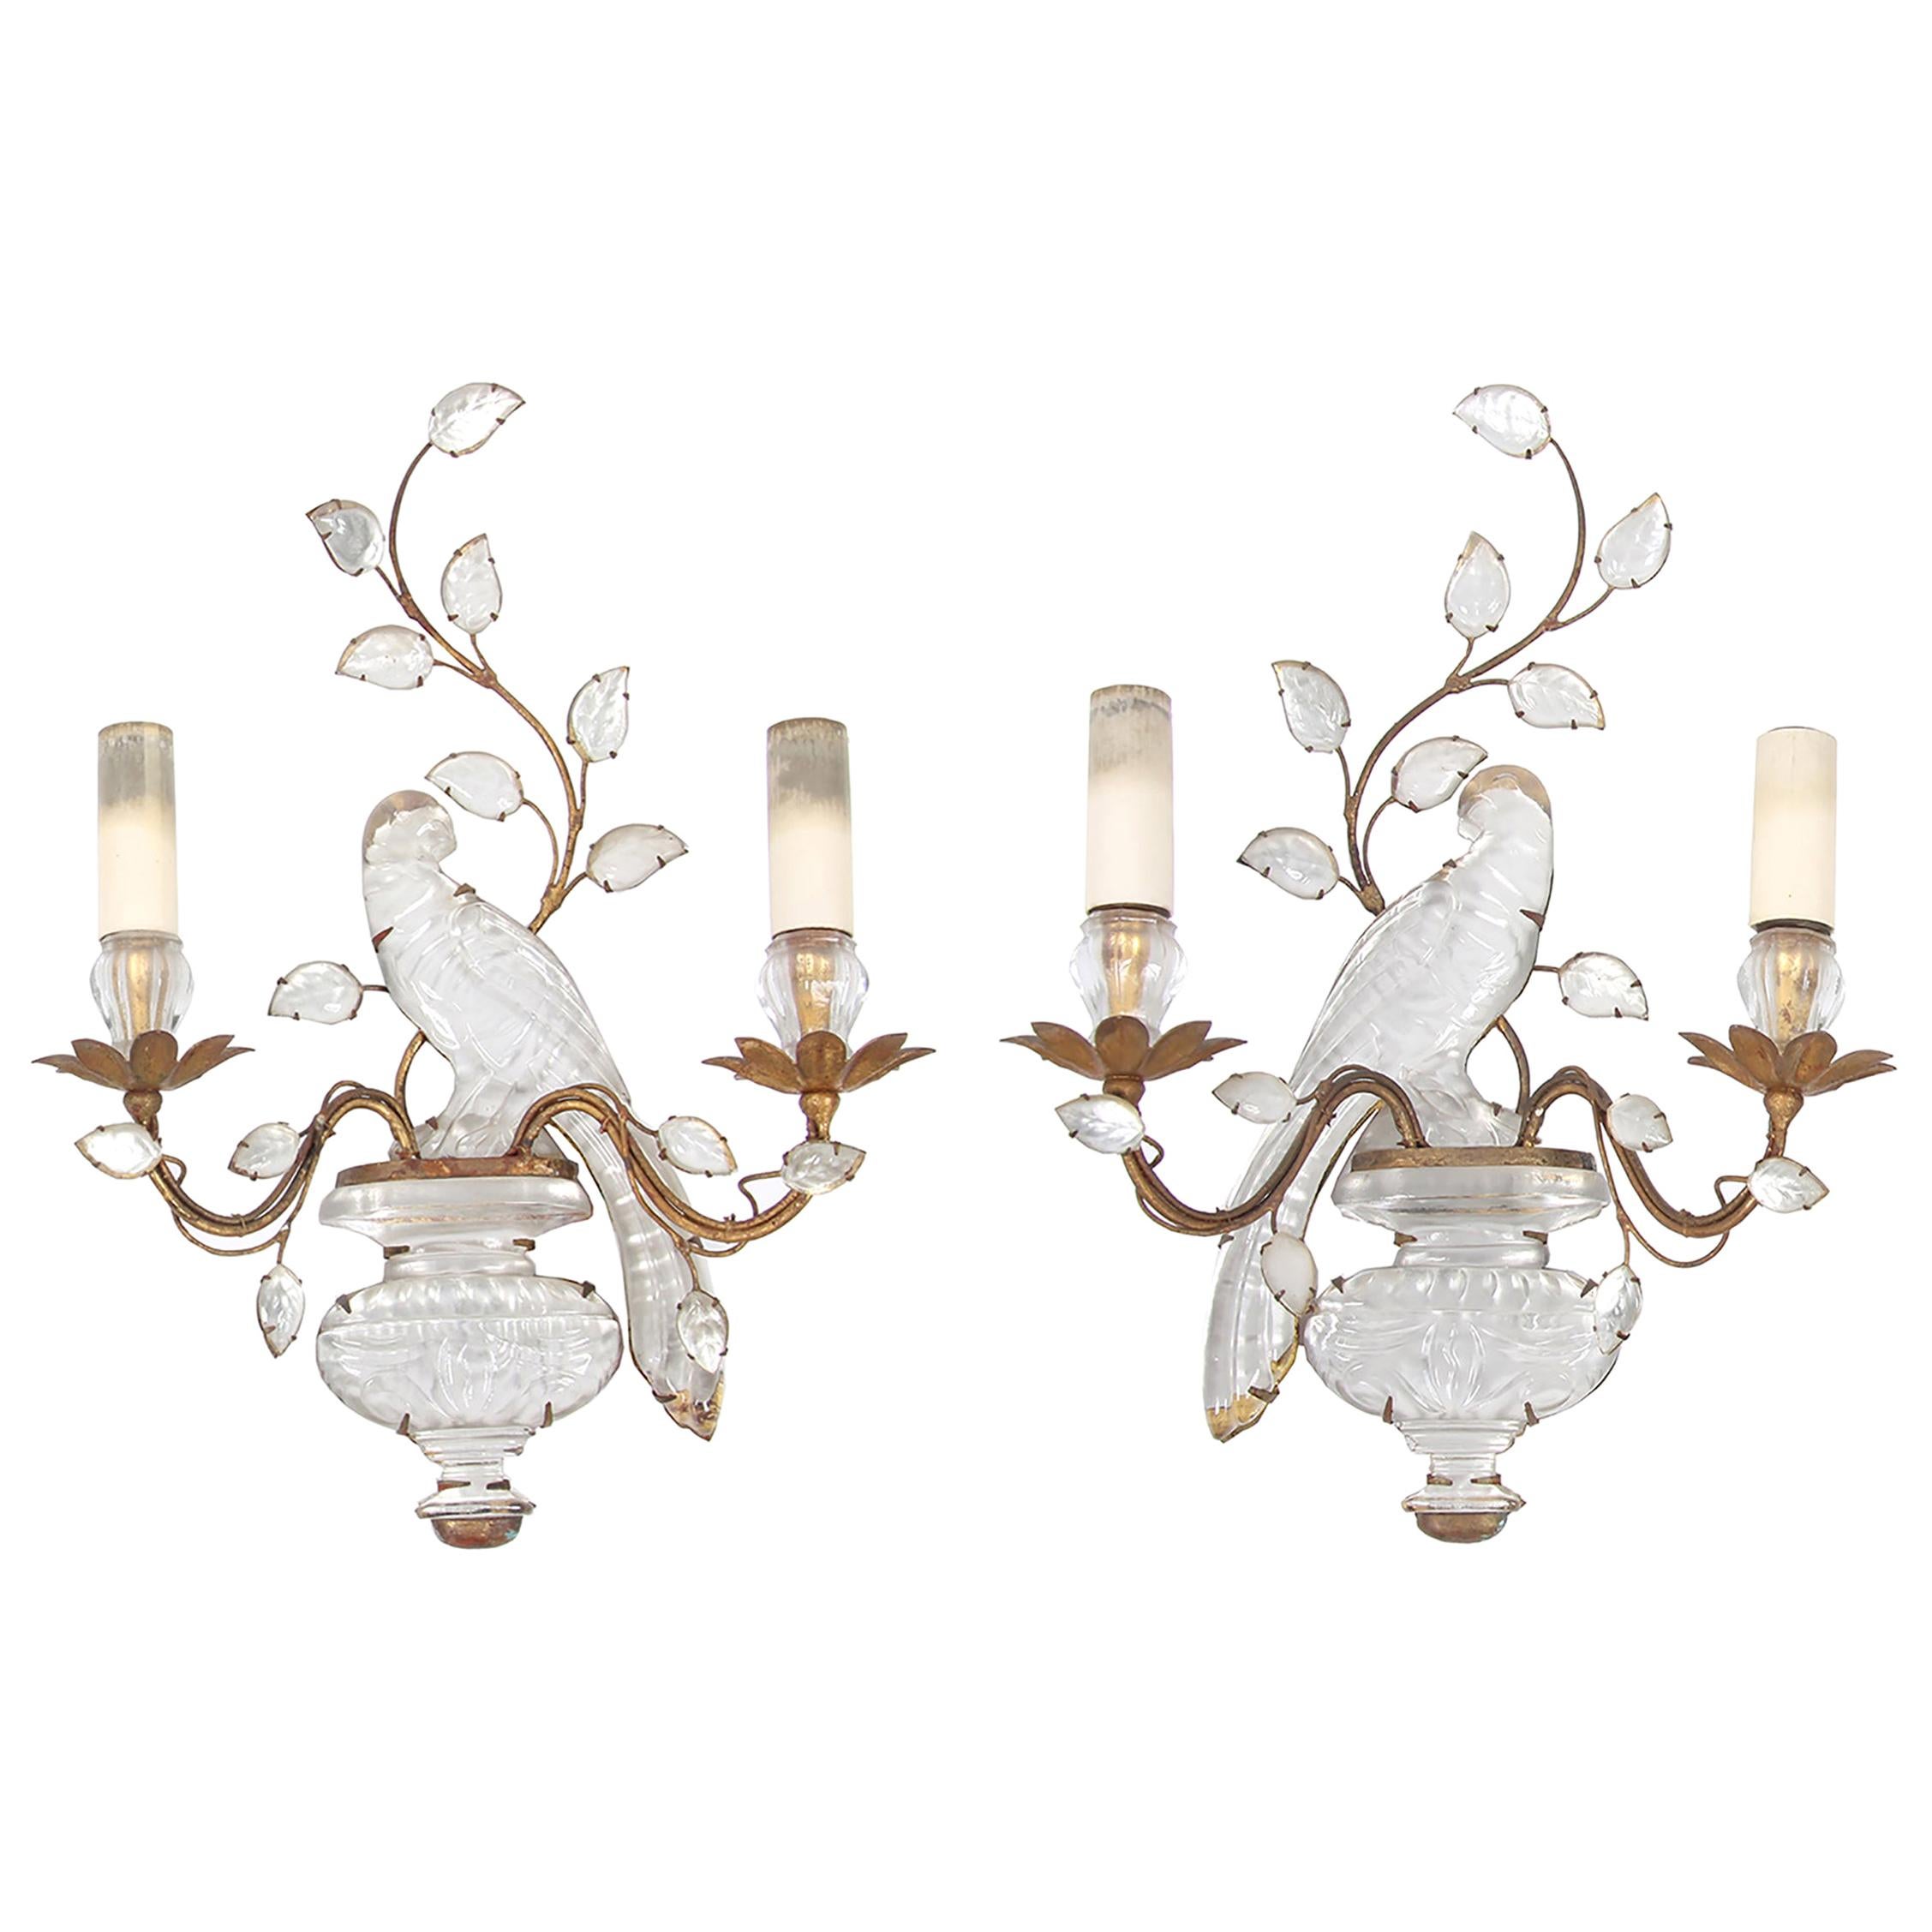 Maison Baguès Pair of Wall Sconces, Iconic Parrot and Urn Design For Sale